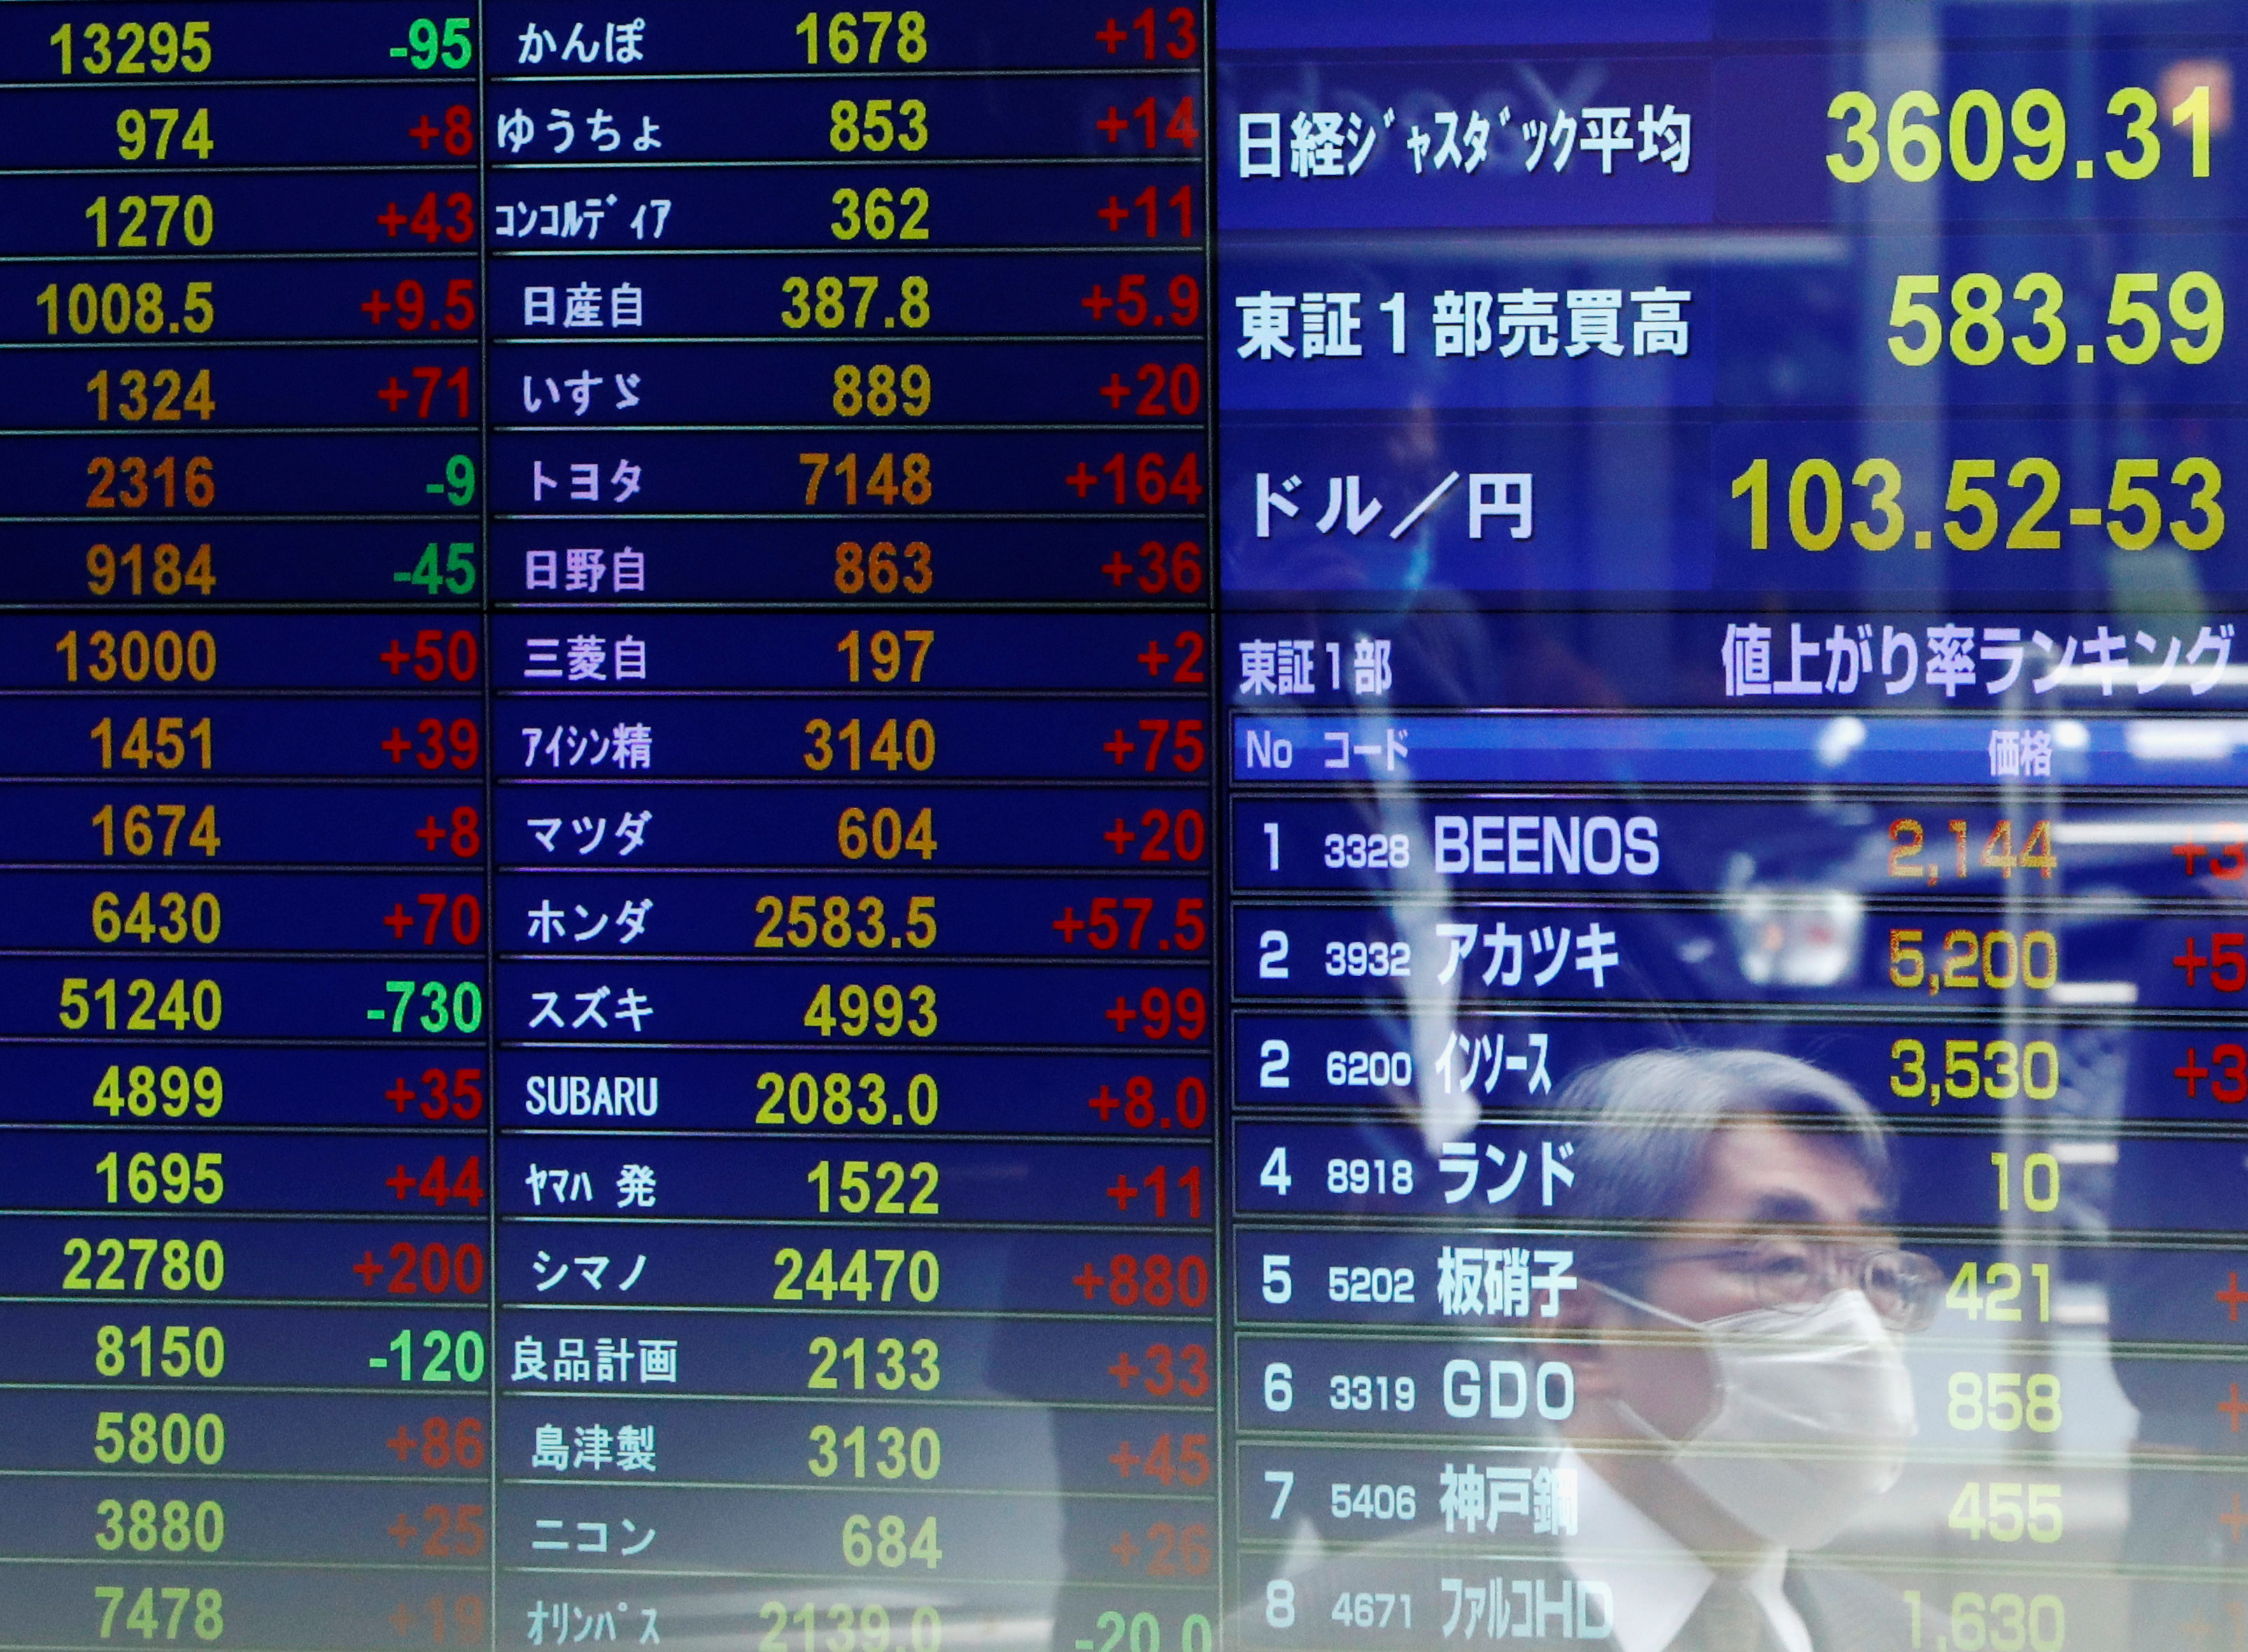 A passersby wearing a protective face mask is reflected on screen displaying the Japanese yen exchange rate against the U.S. dollar and stock prices at a brokerage, amid the coronavirus disease (COVID-19) outbreak, in Tokyo